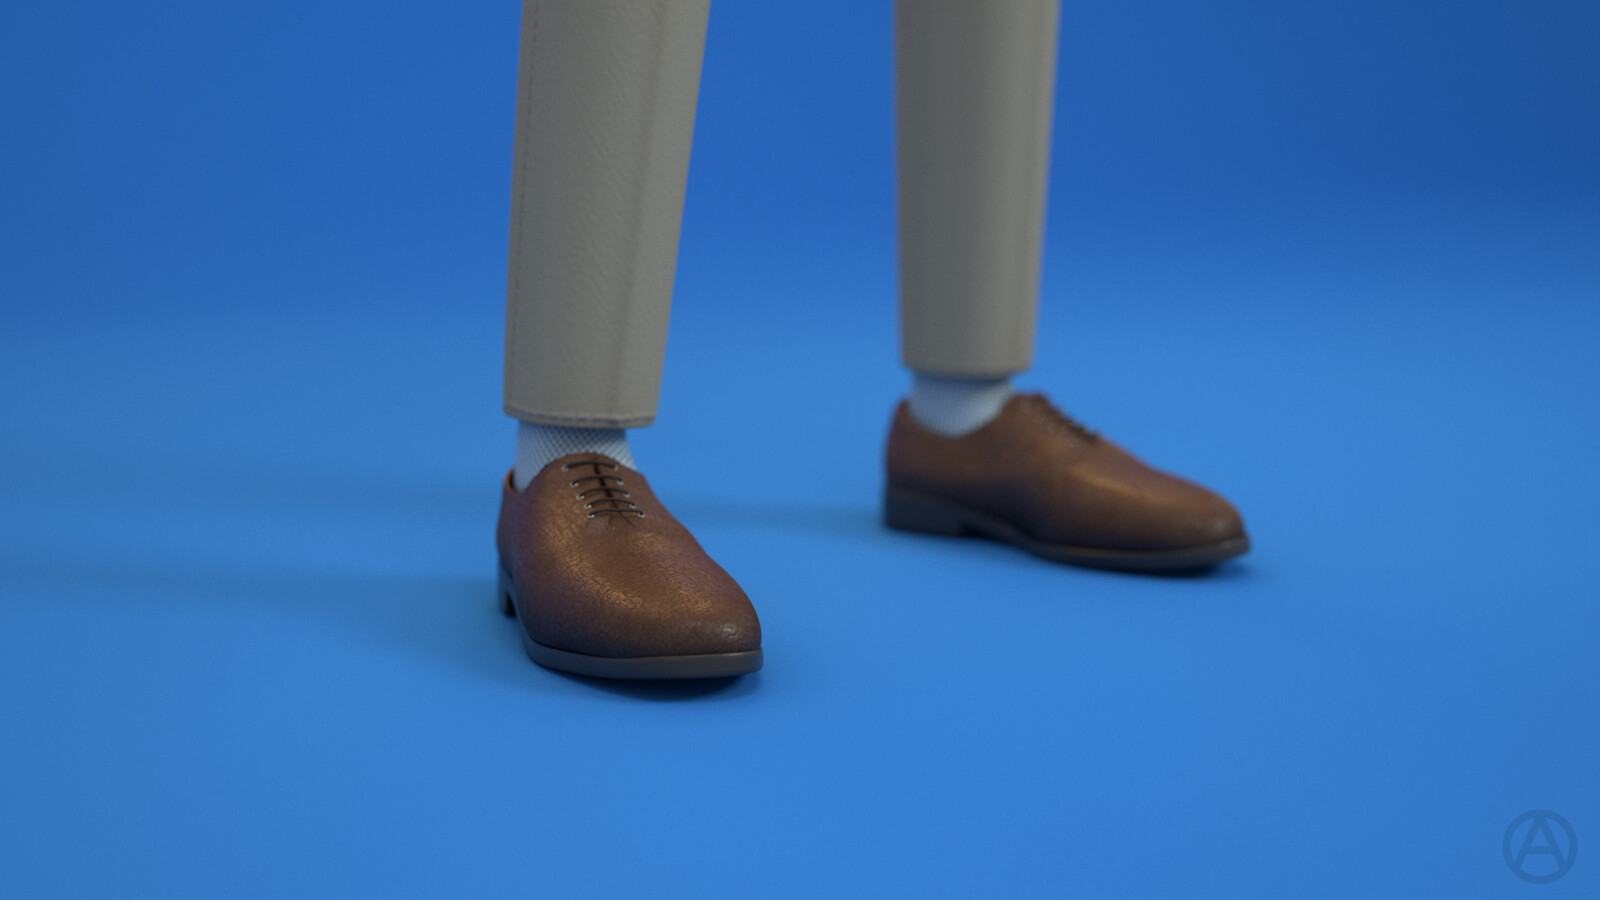 Working On Alert Man, shoes